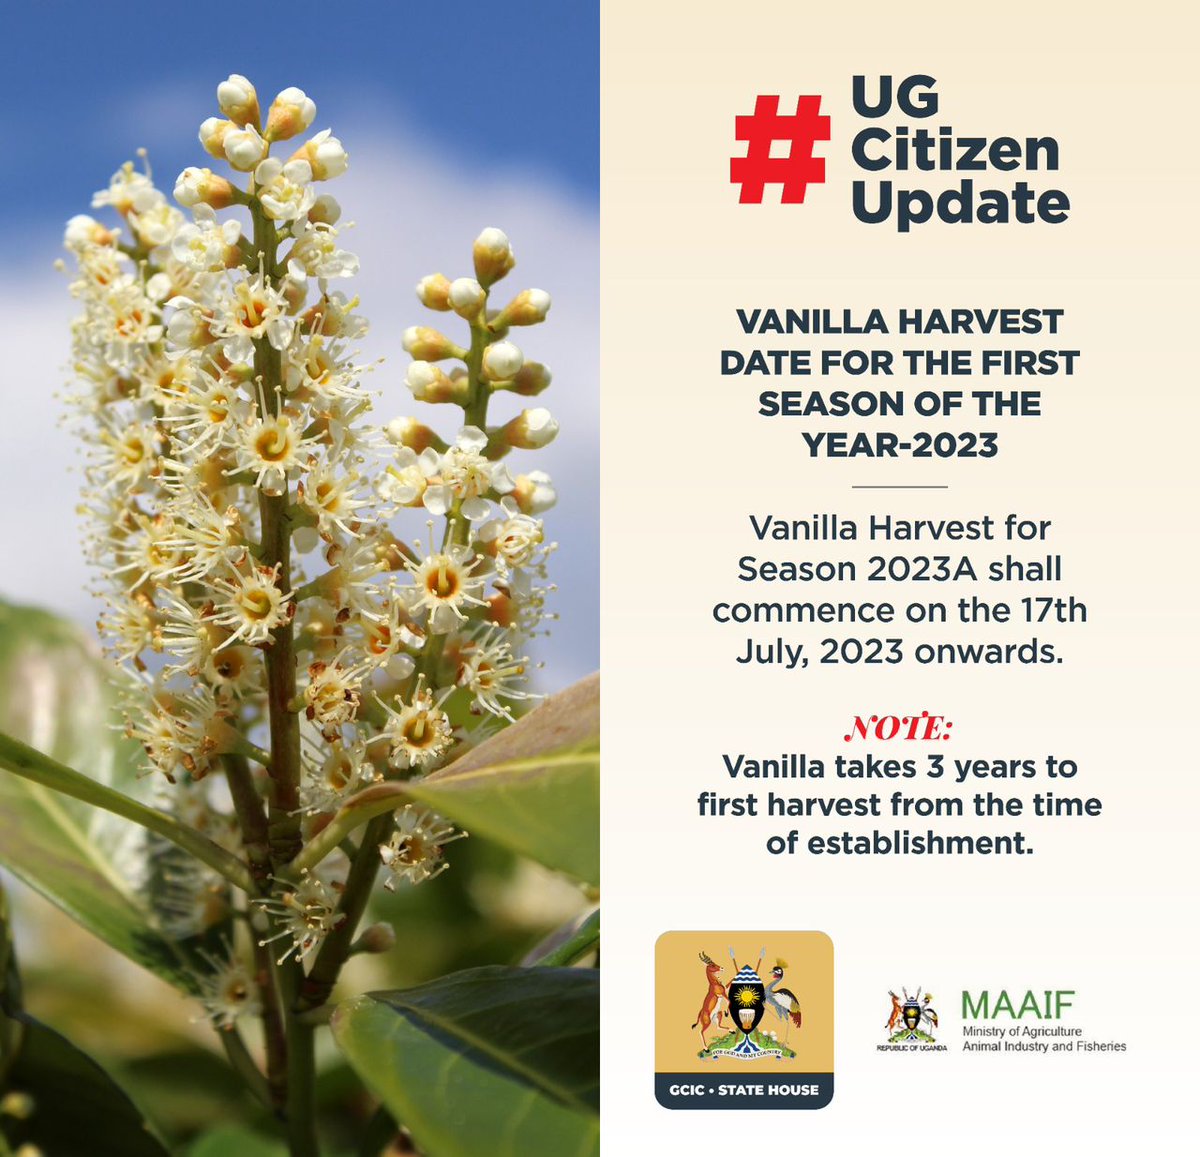 🌱🌼 Vanilla farmers in Uganda, mark your calendars! The first season of Vanilla Harvest for 2023 will begin on July 17th, 2023. According to @ugandaexports , Uganda exported 89.038 tonnes of cured vanilla worth $8.33m by March, 2023. 🌿🍃 #agriculture @FrankTumwebazek